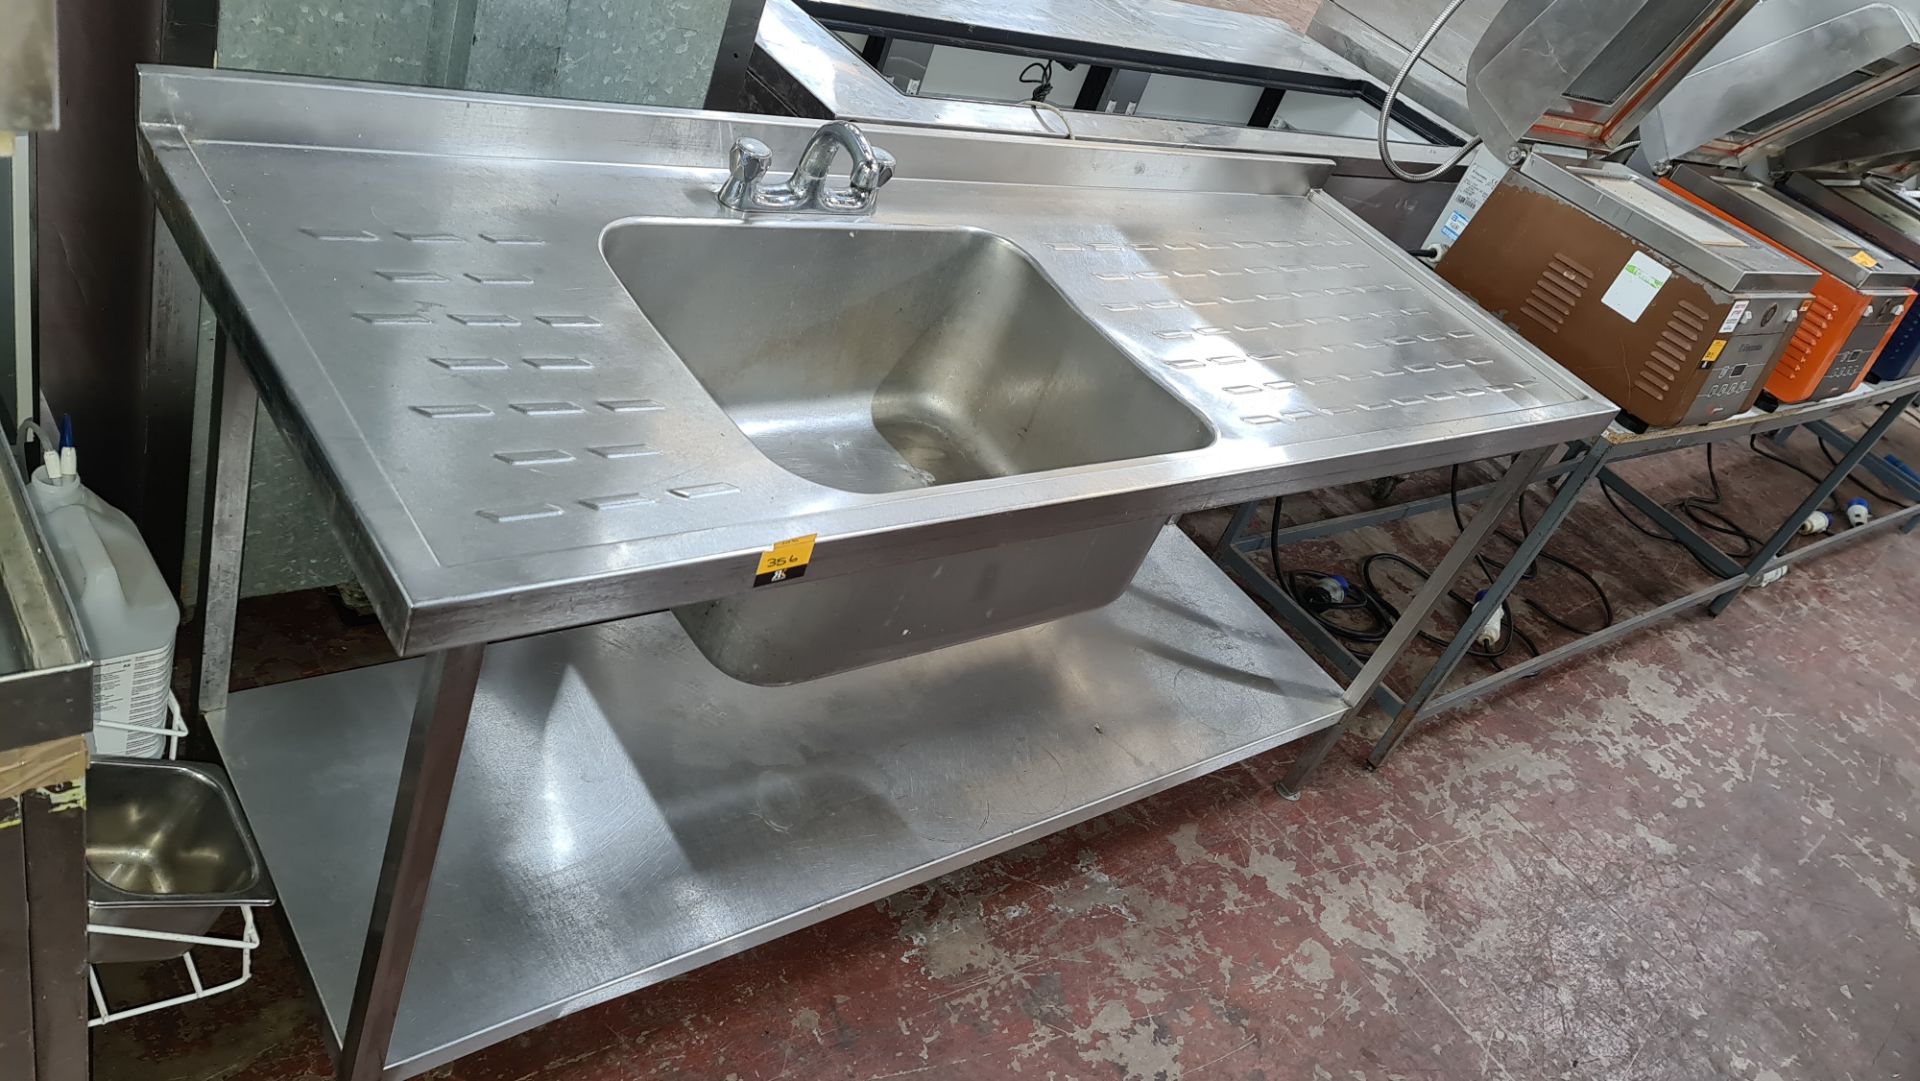 Stainless steel floor standing basin with drainers to both sides plus mixer tap. Max width approxim